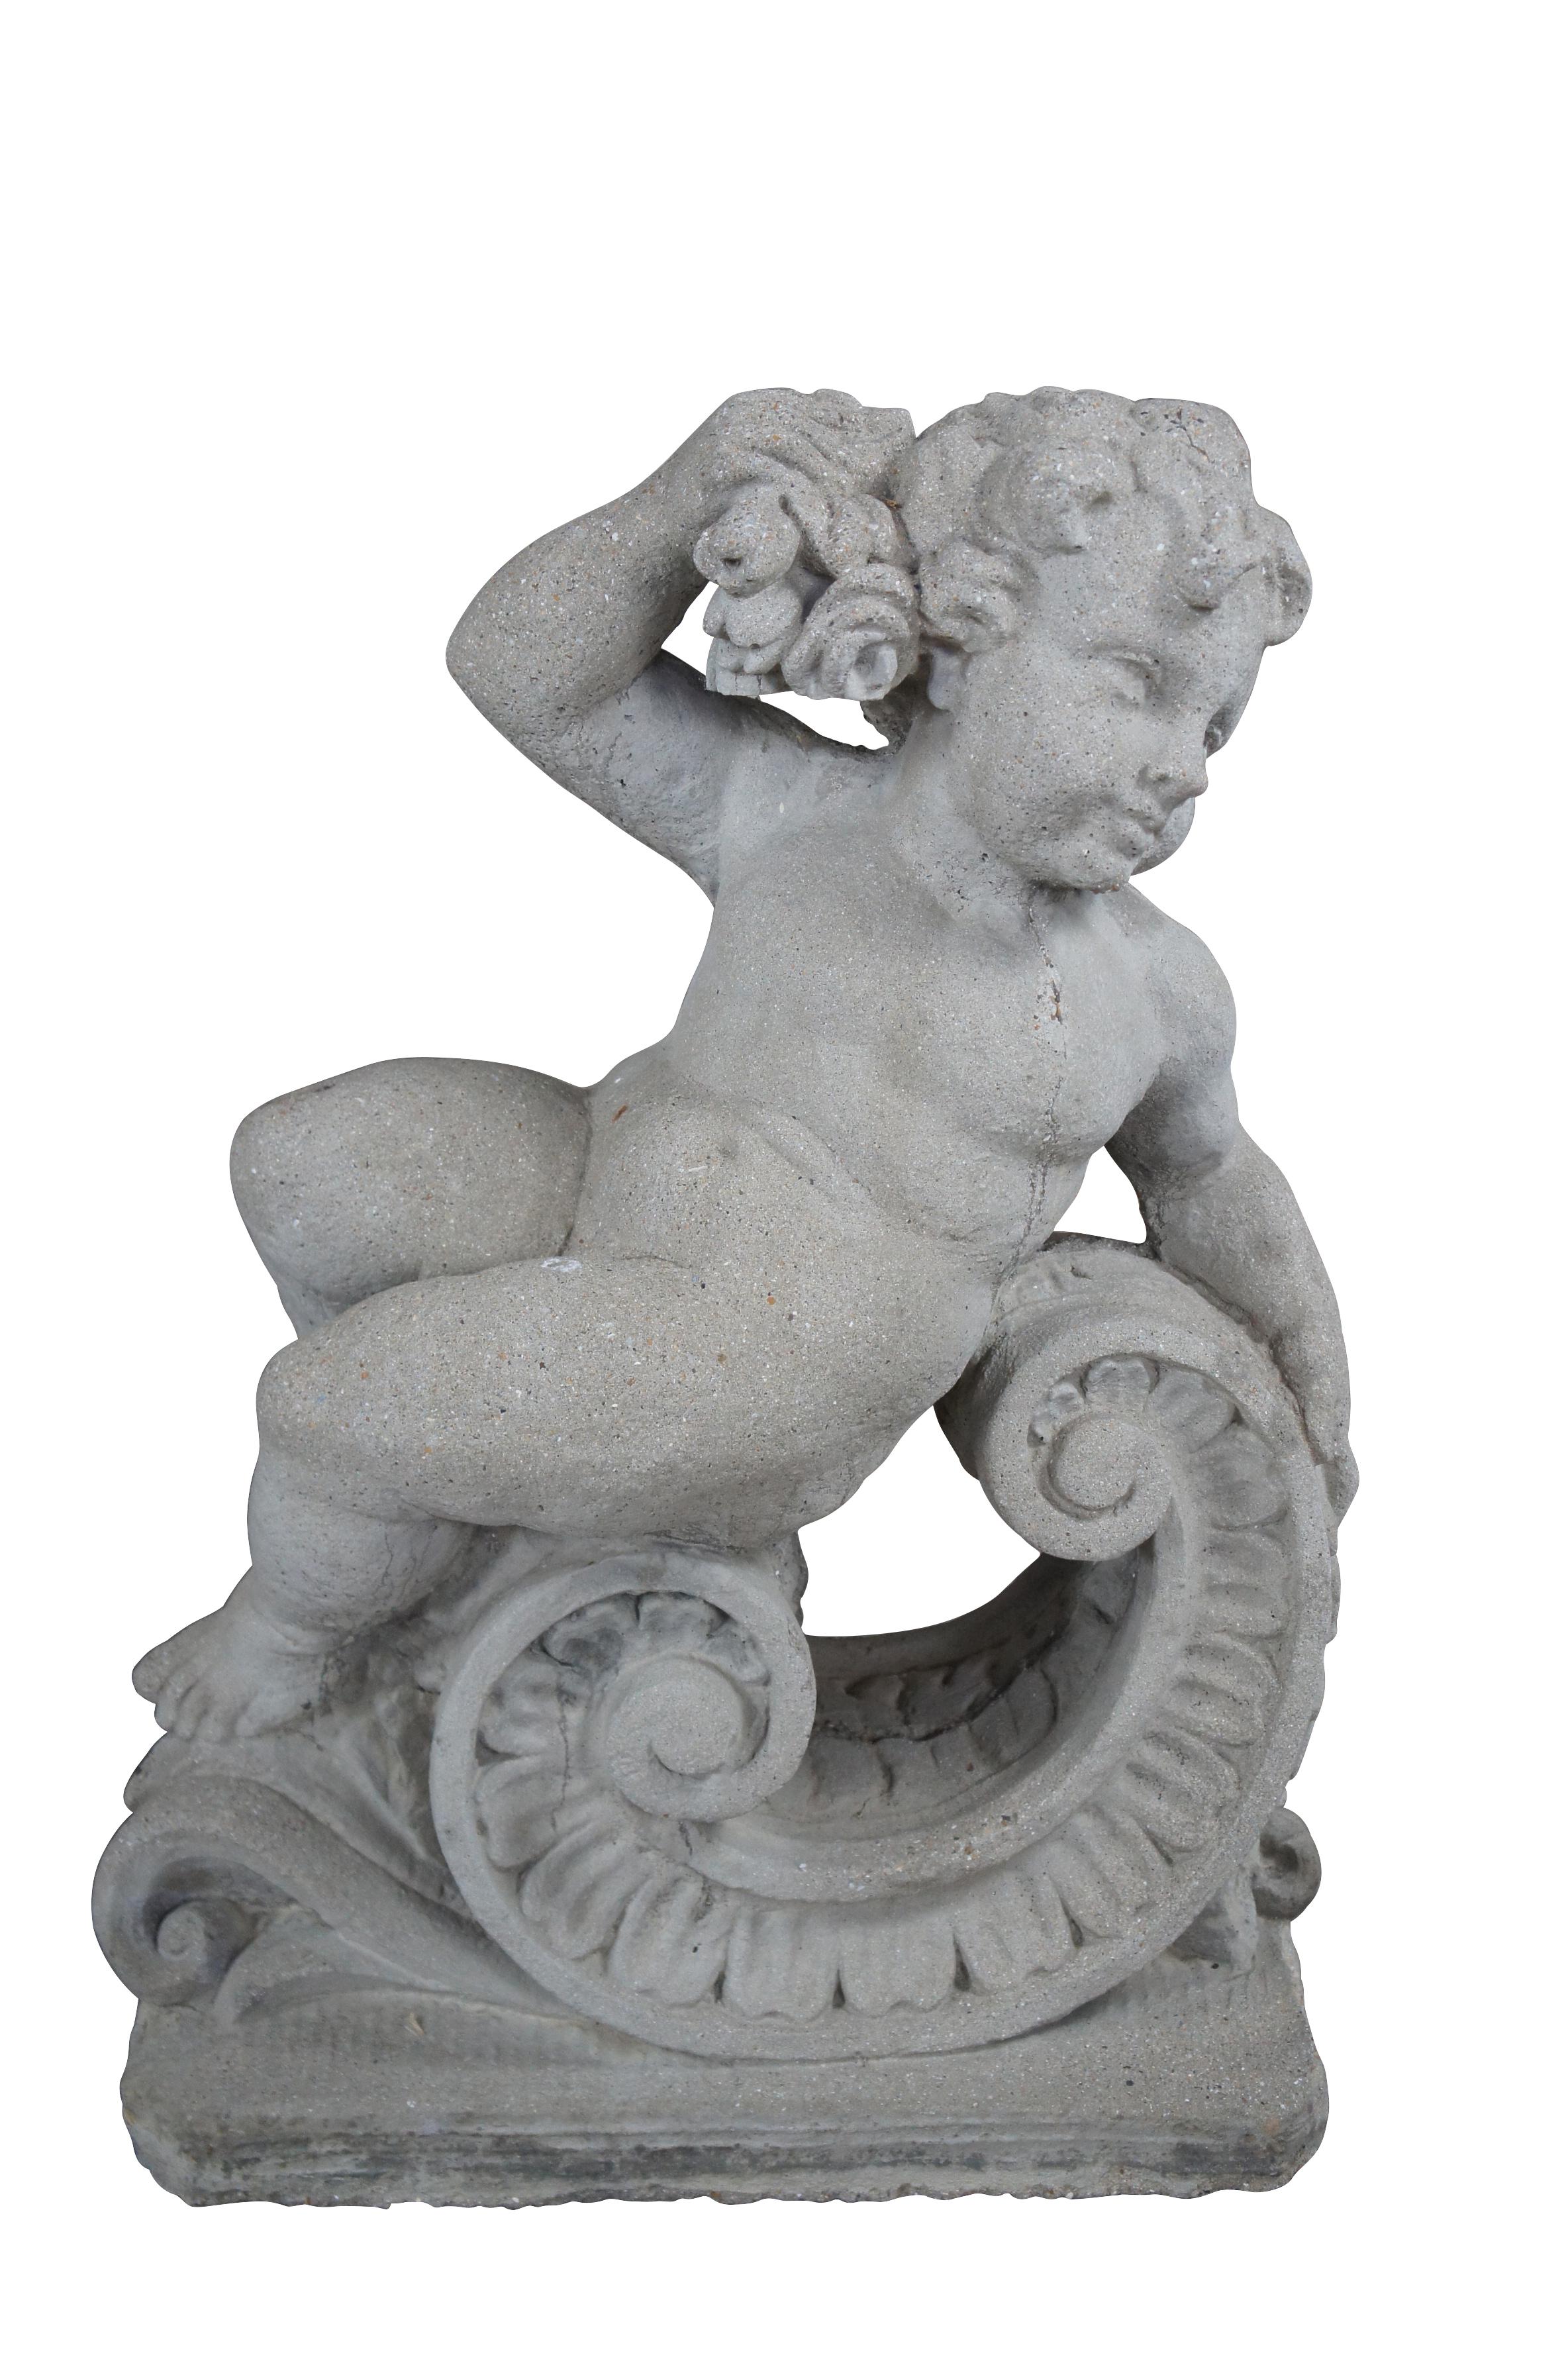 Pair of antique classical French putto / cherub statues representing two of the four seasons.  Made of concrete / stone featuring two reclining figures, one left facing with wheat and the other right facing with grapes.  Both figures sit on a